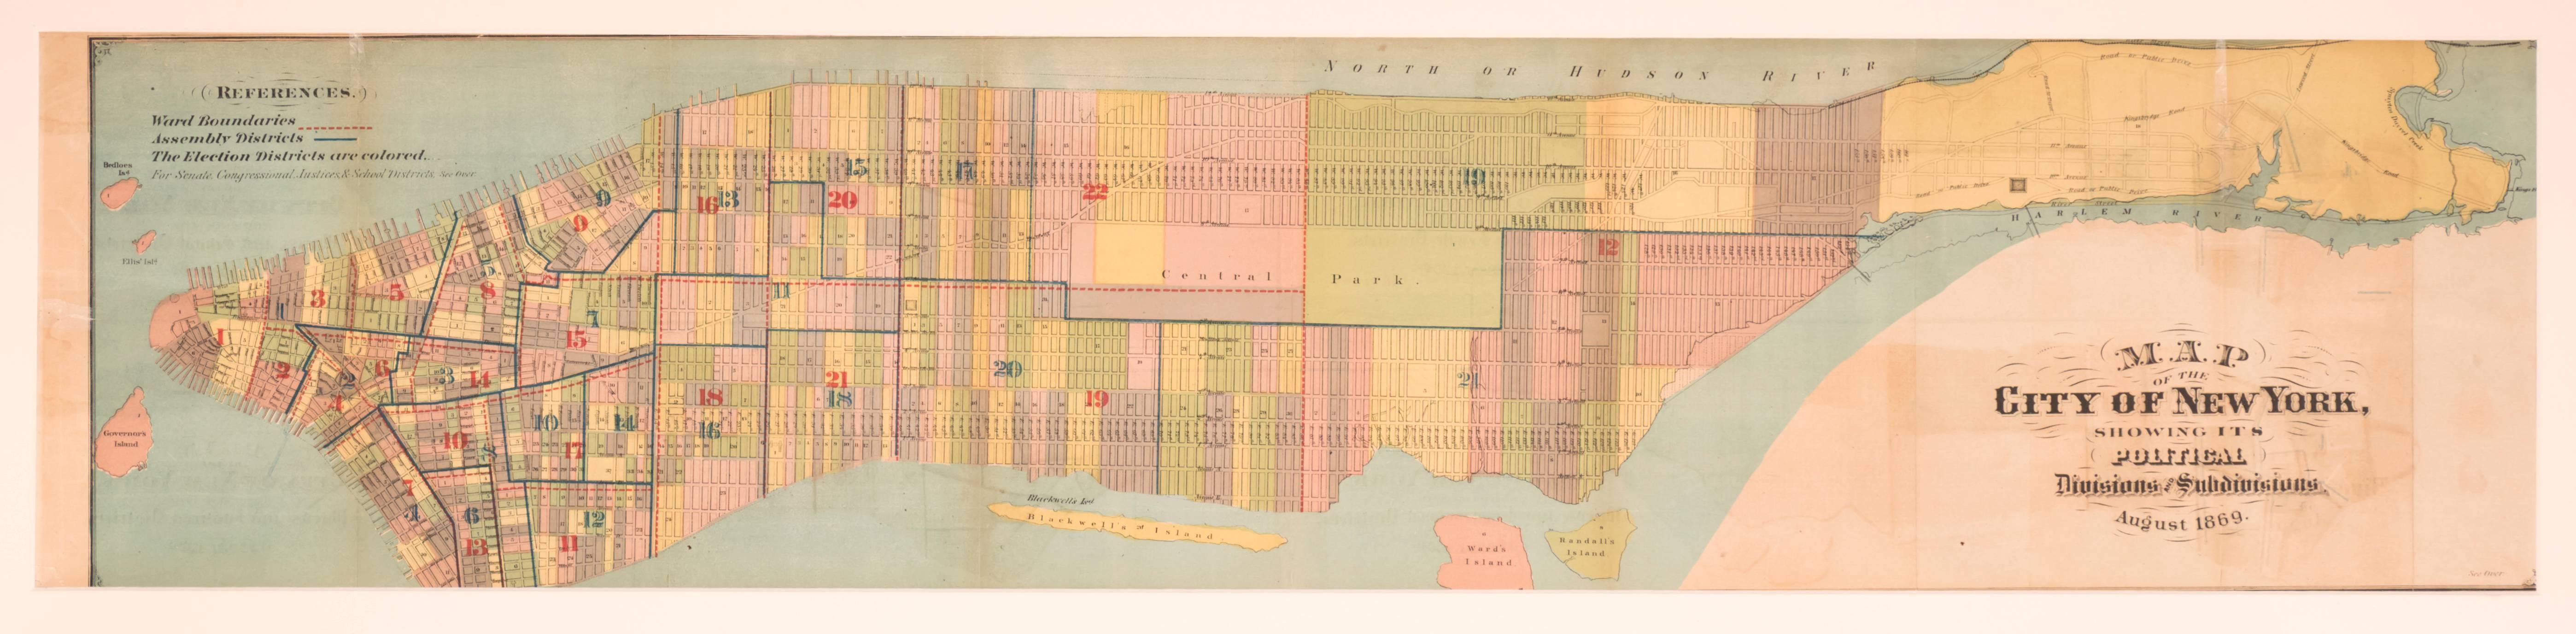 Historic Plan of New York City Showing Political, Legal, School Districts  - Realist Print by Unknown